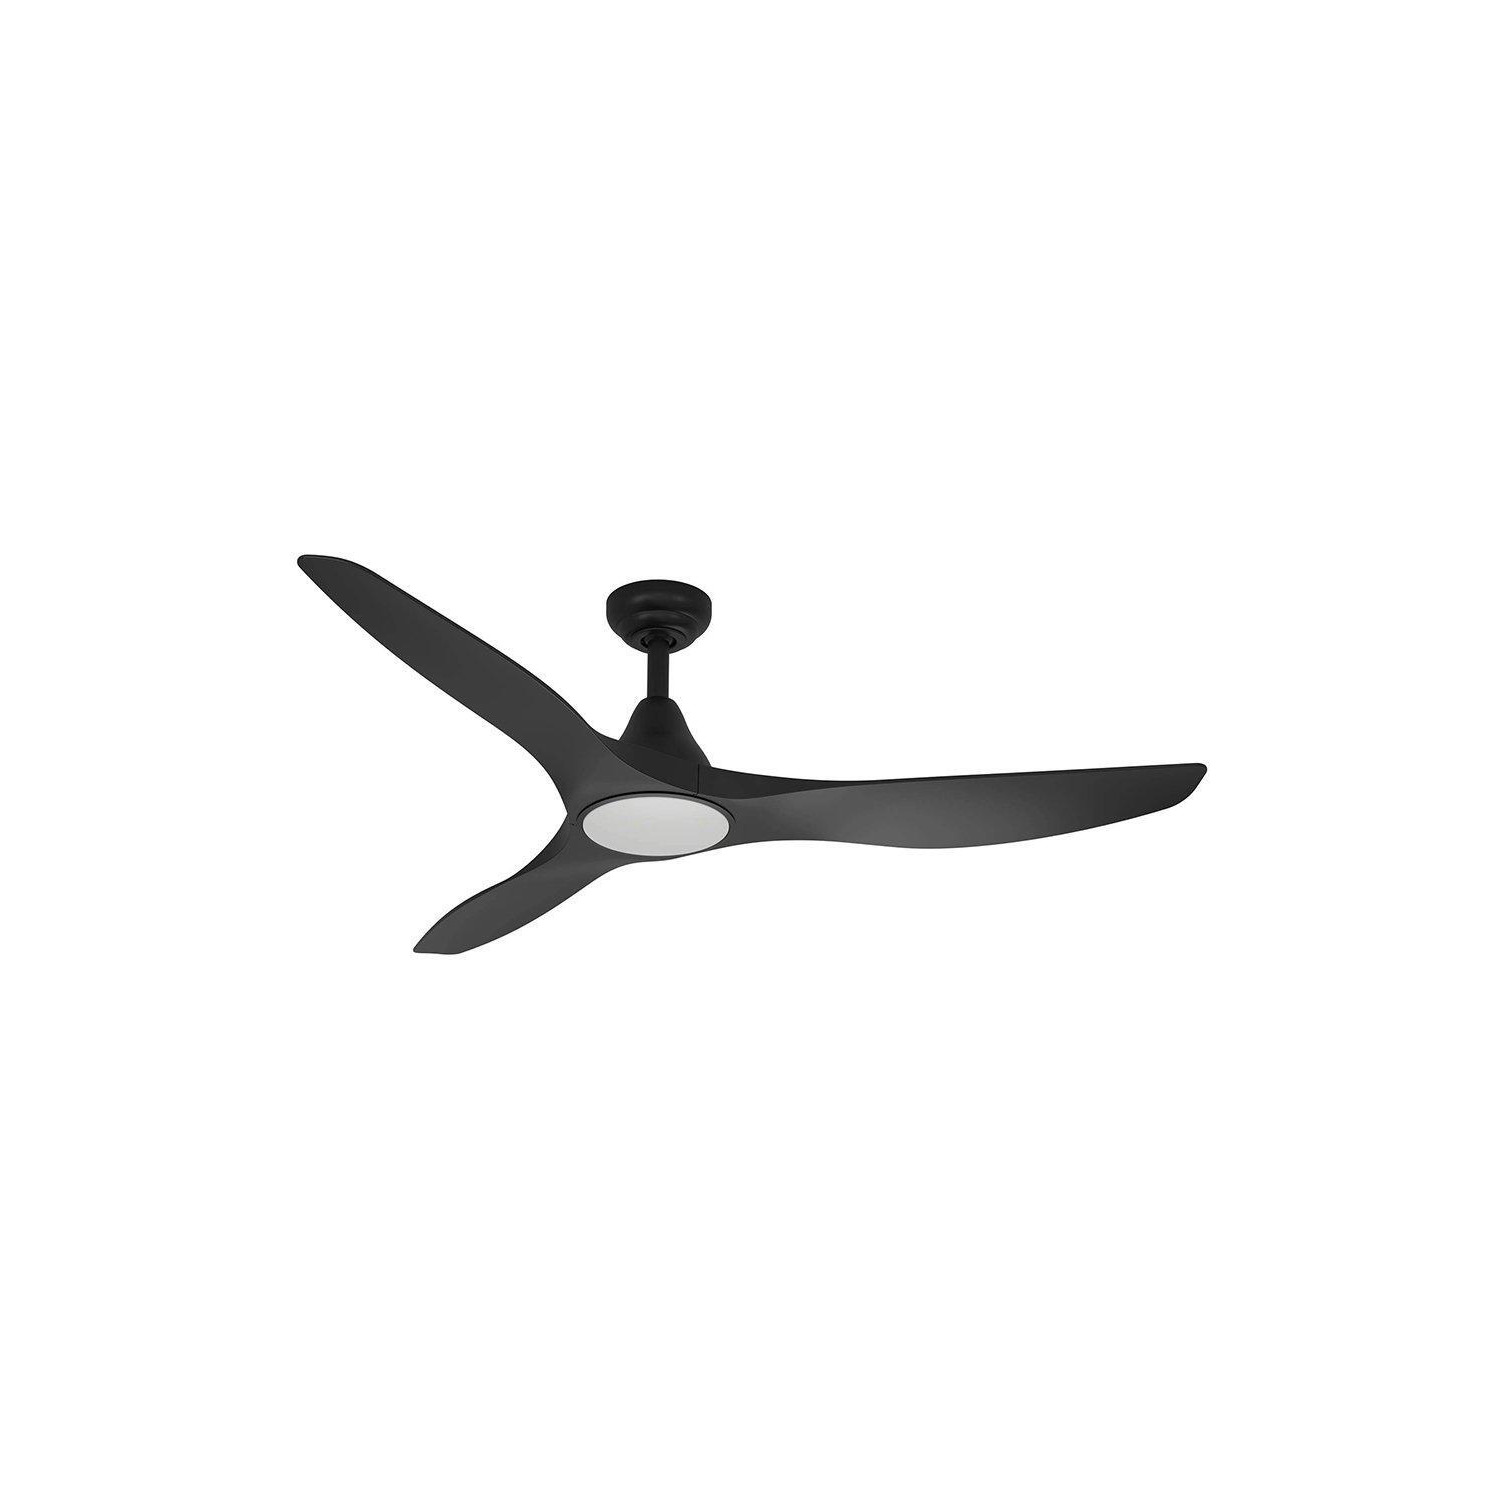 Portsea Matte Black Ceiling Fan With Integrated LEDs - image 1